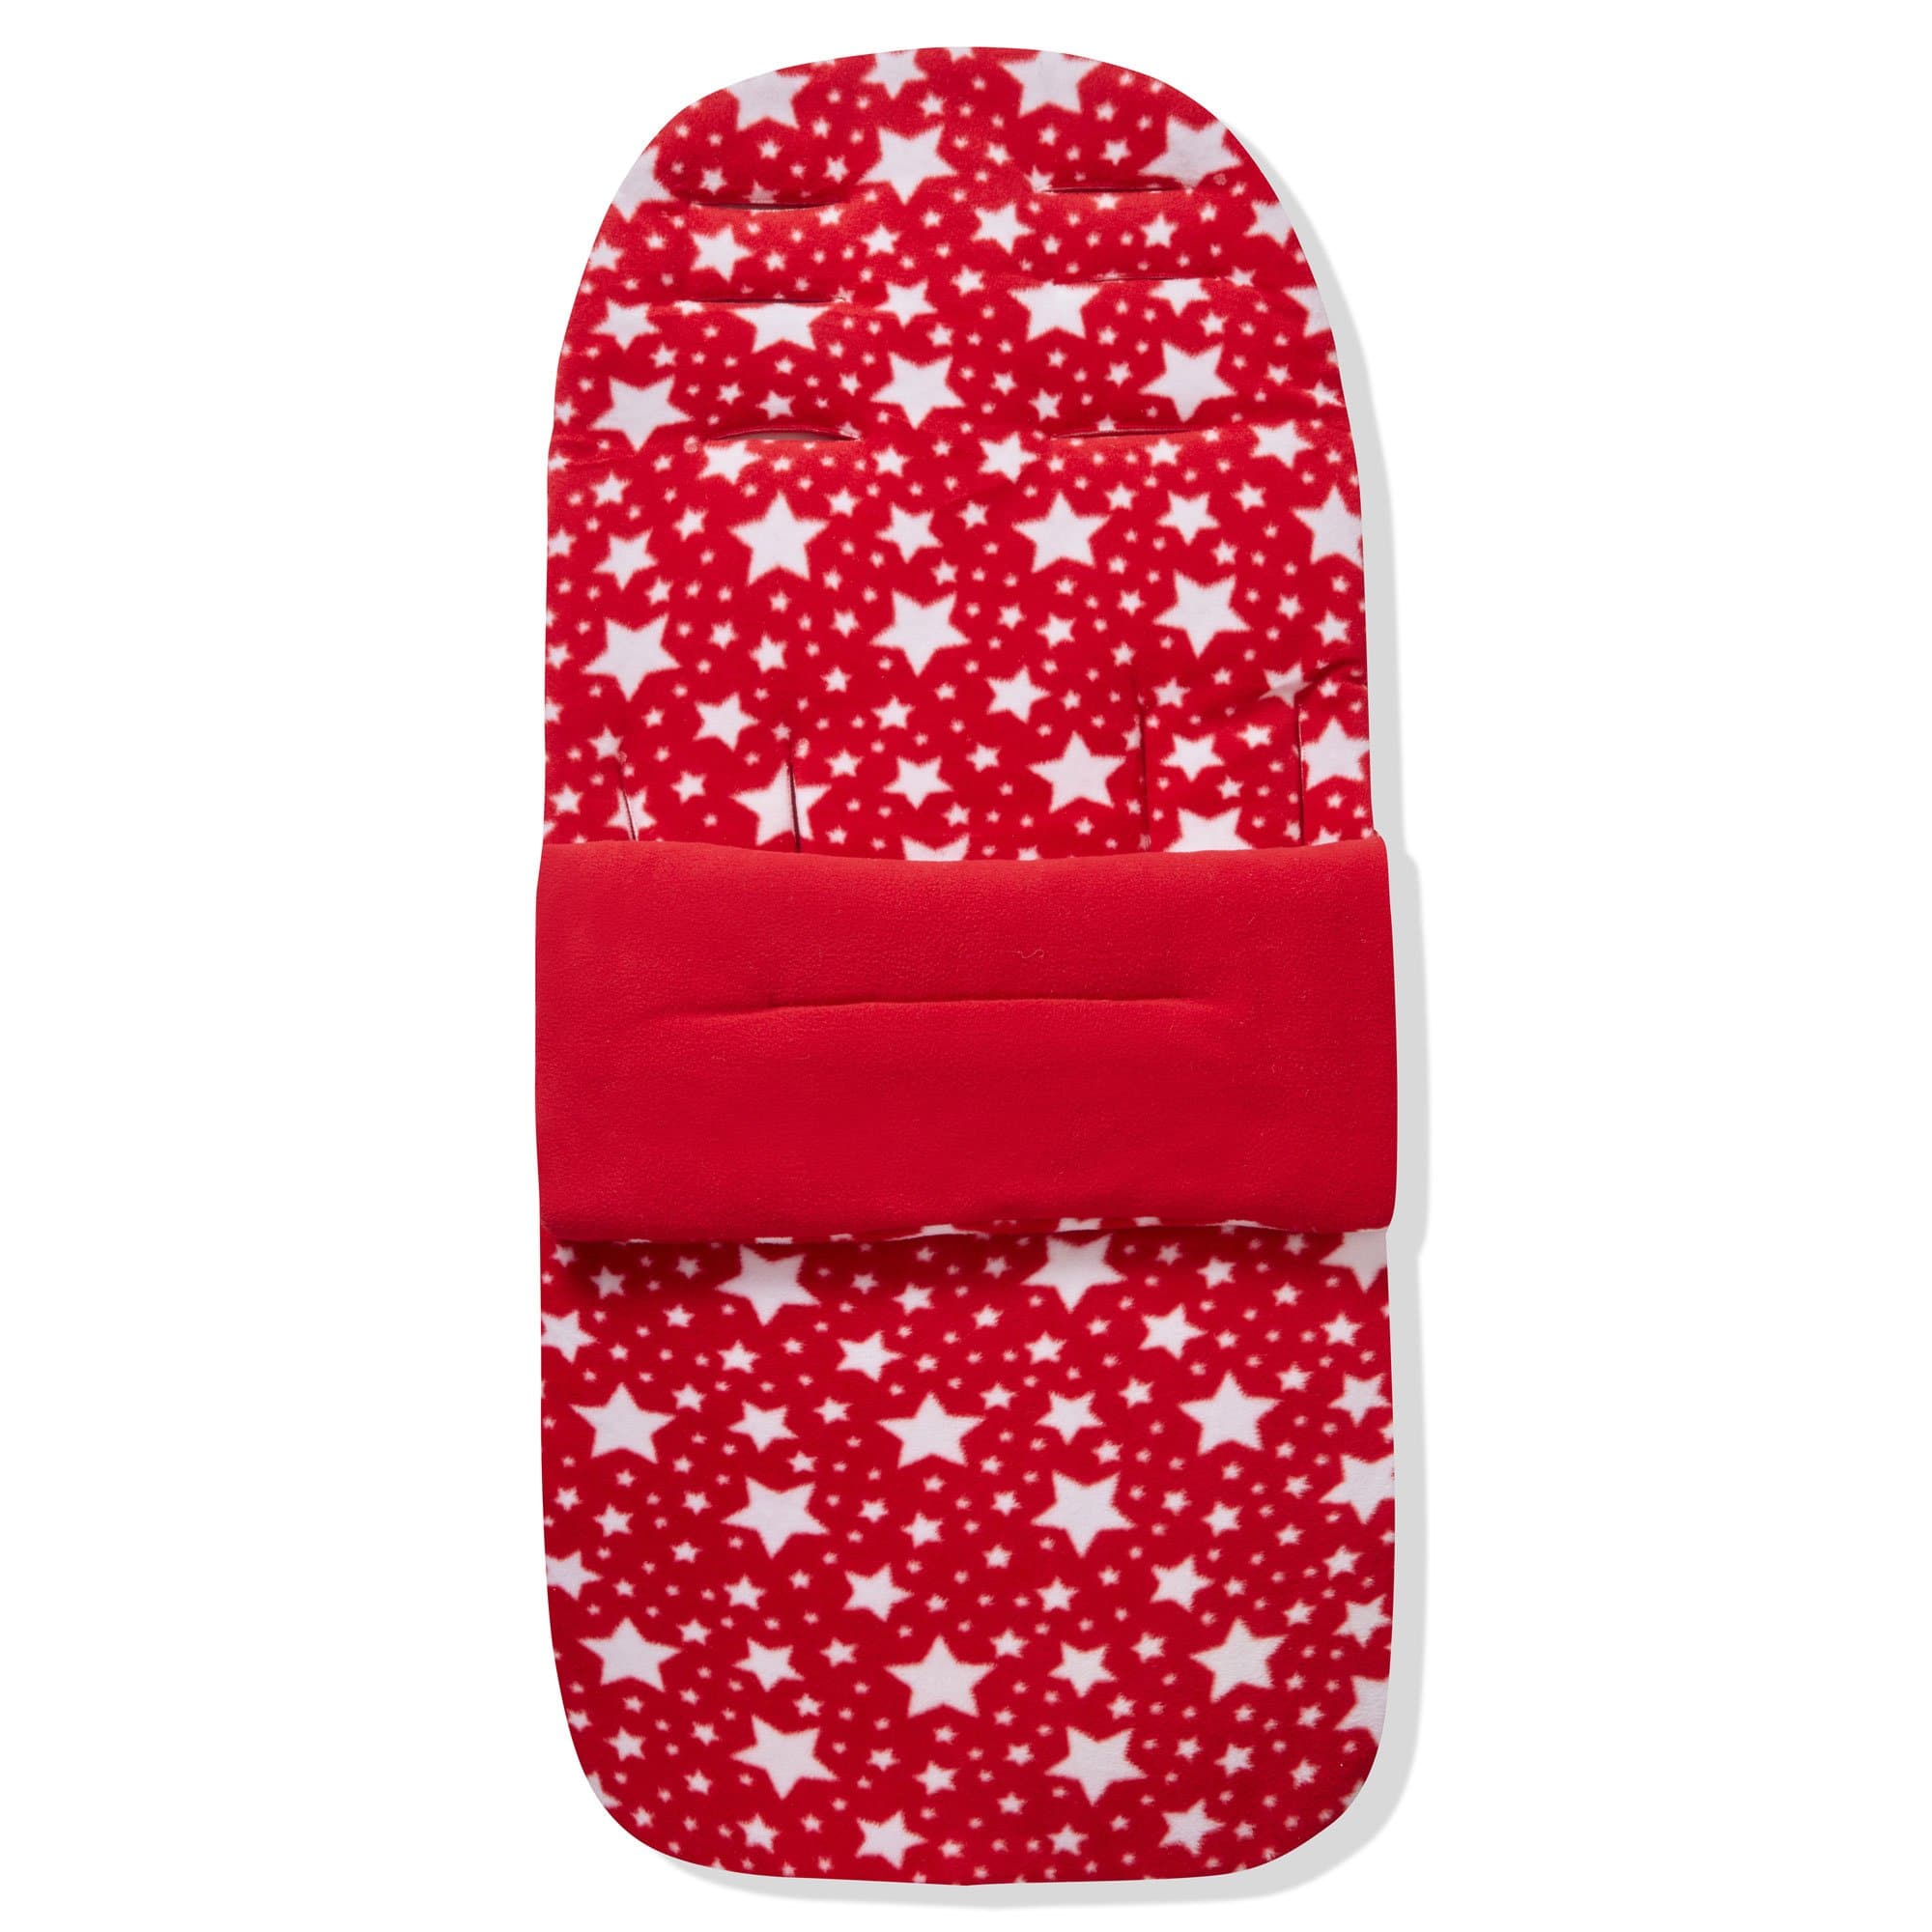 Fleece Footmuff / Cosy Toes Compatible with Silver Cross - For Your Little One